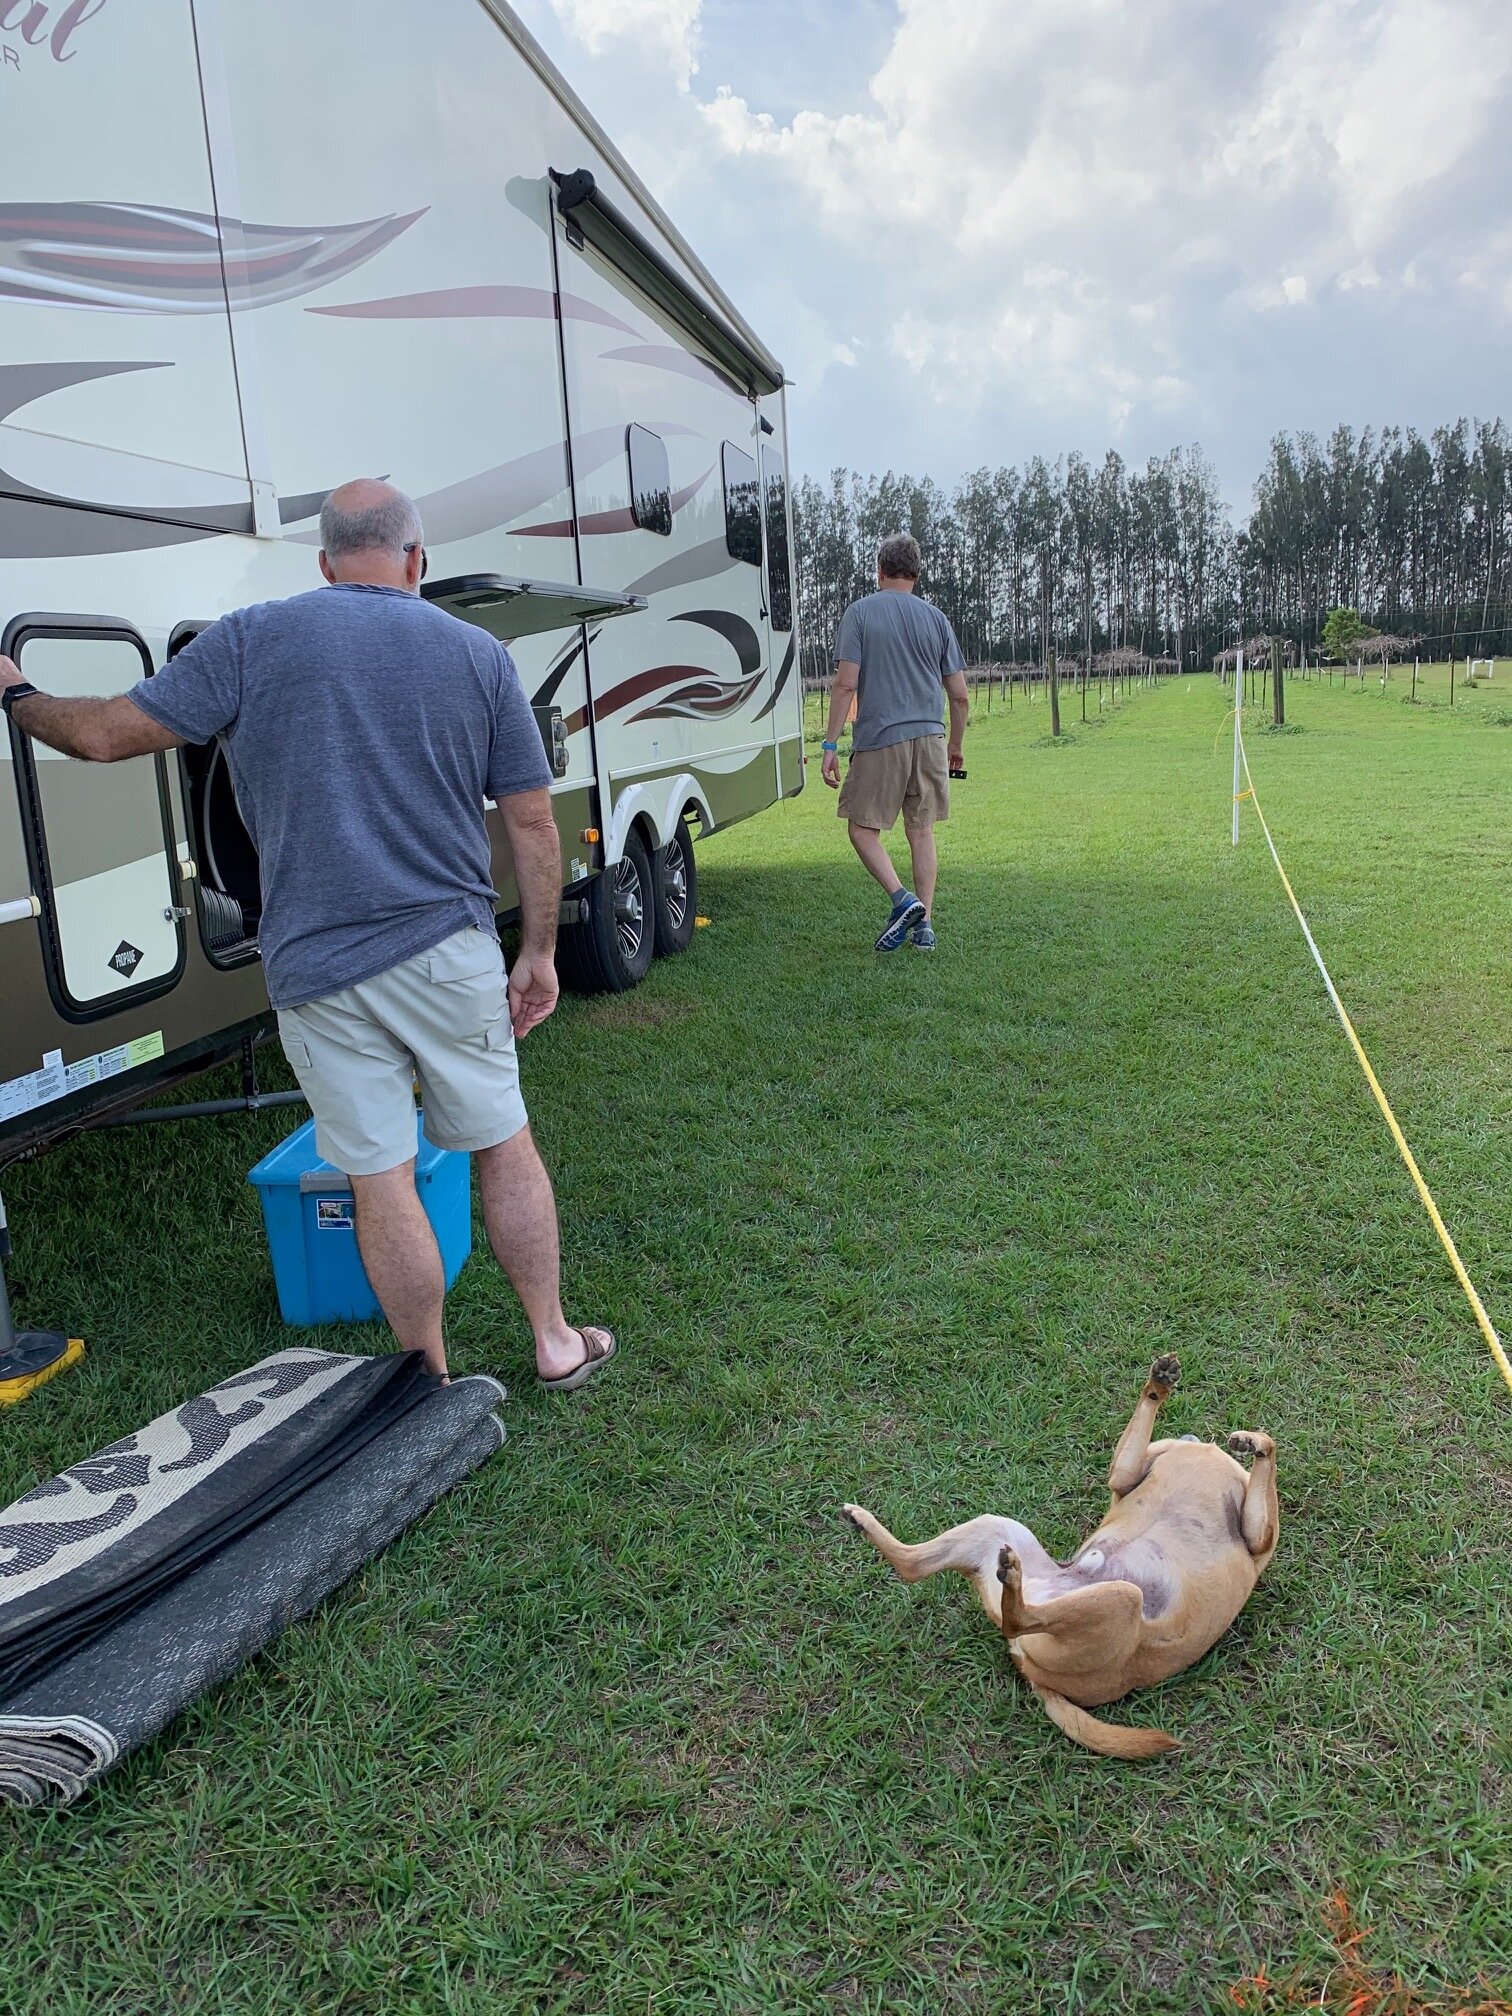  Our site was right beside the vineyard. After the four of us enjoyed the Port Canaveral area for a couple days, Matt and Holly Miller followed us to Fort Pierce to help set up, and then they headed back to Port Canaveral in hopes of seeing a rocket 